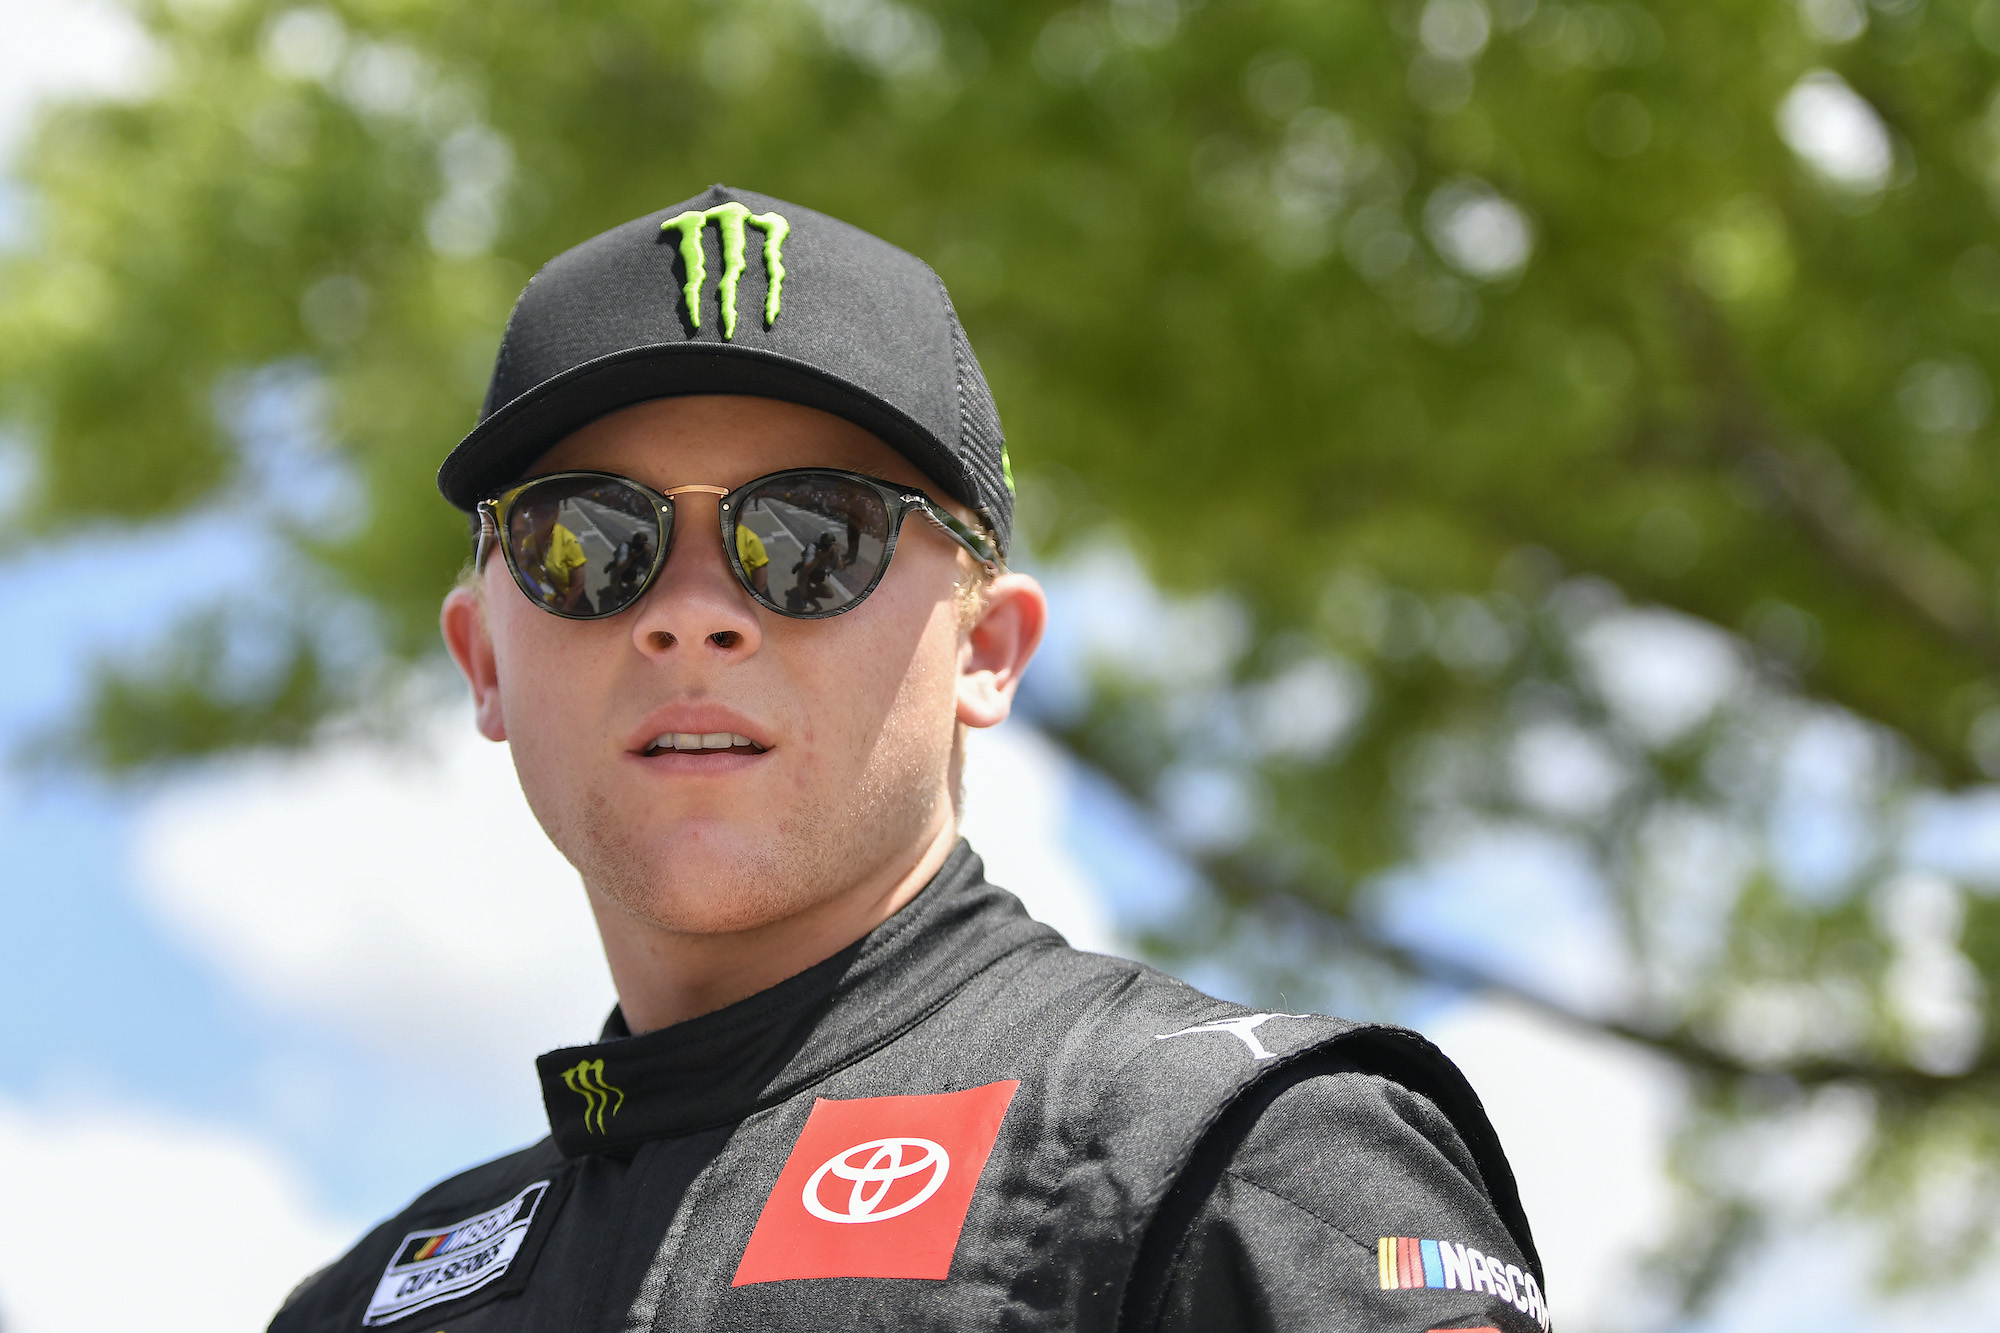 Ty Gibbs Privately Admitted He Wasn’t Pleased With How a Pair of Toyota Teammates ‘Used Me Up’ During Cup Race at Indy, According to Denny Hamlin